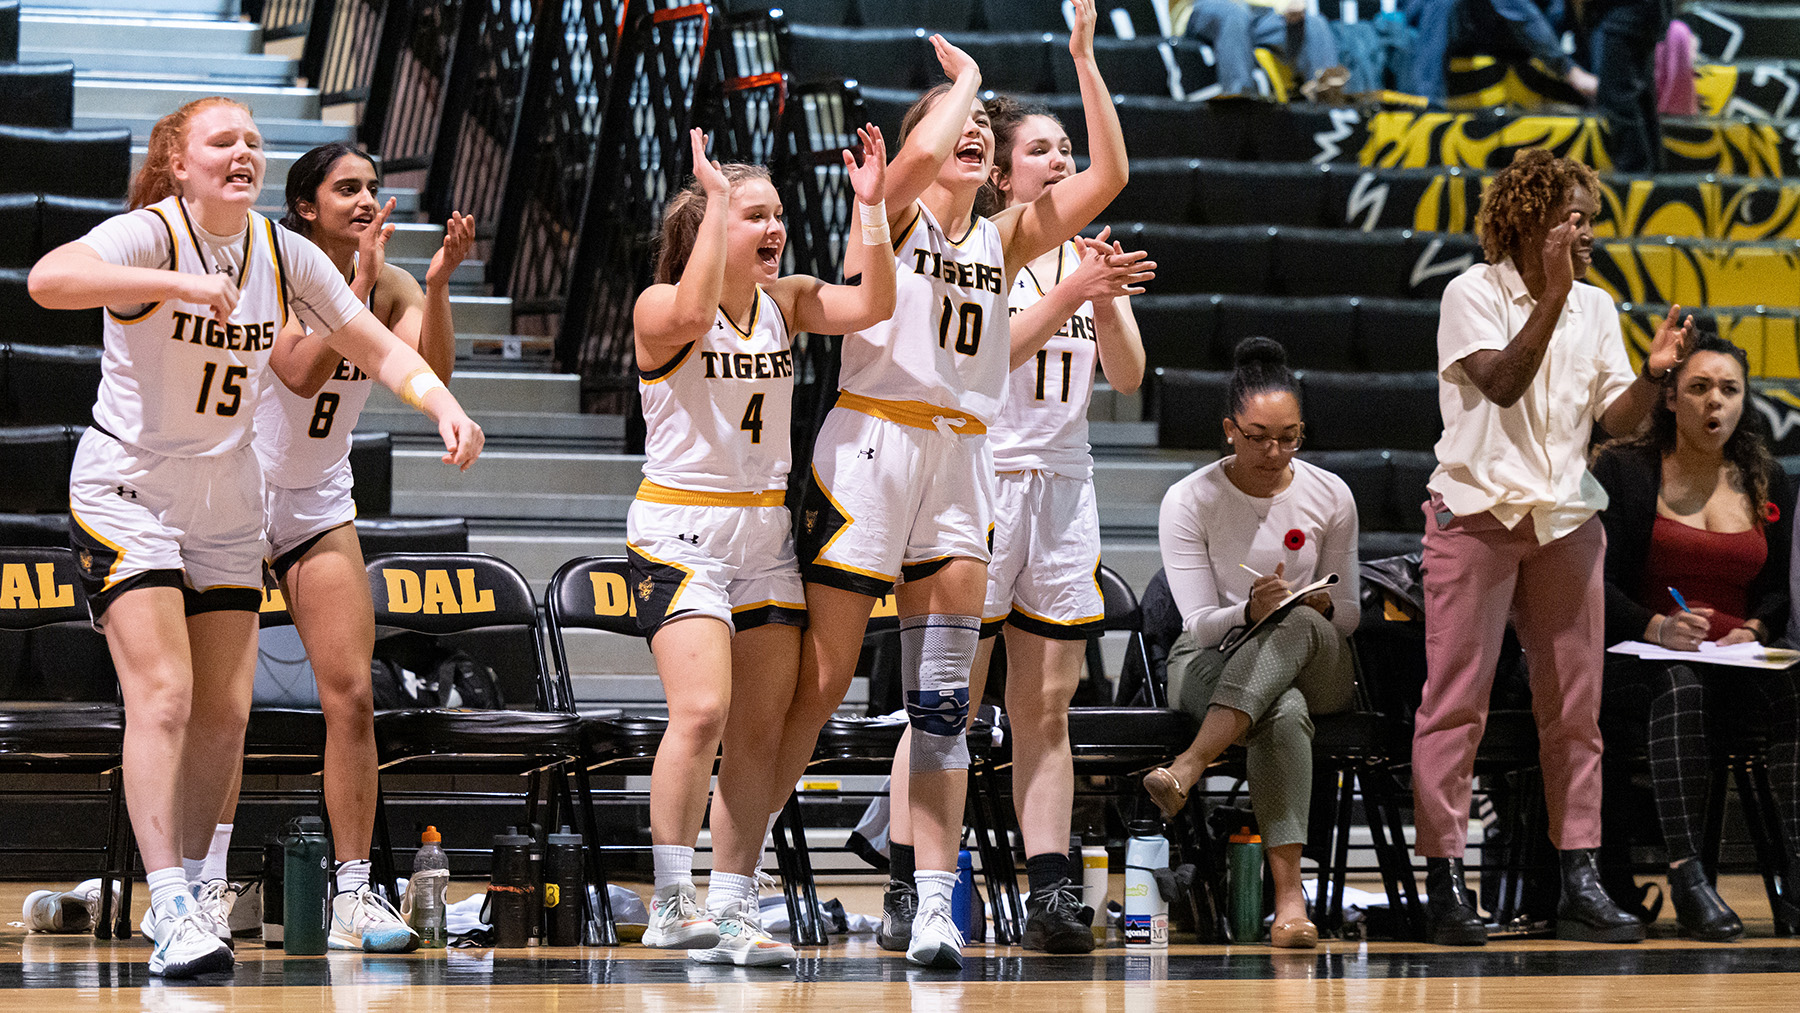 Players and assistant coaches for the Dalhousie women's basketball team cheer from the bench. Marika Williams (right) is taking part in the female coach development program.